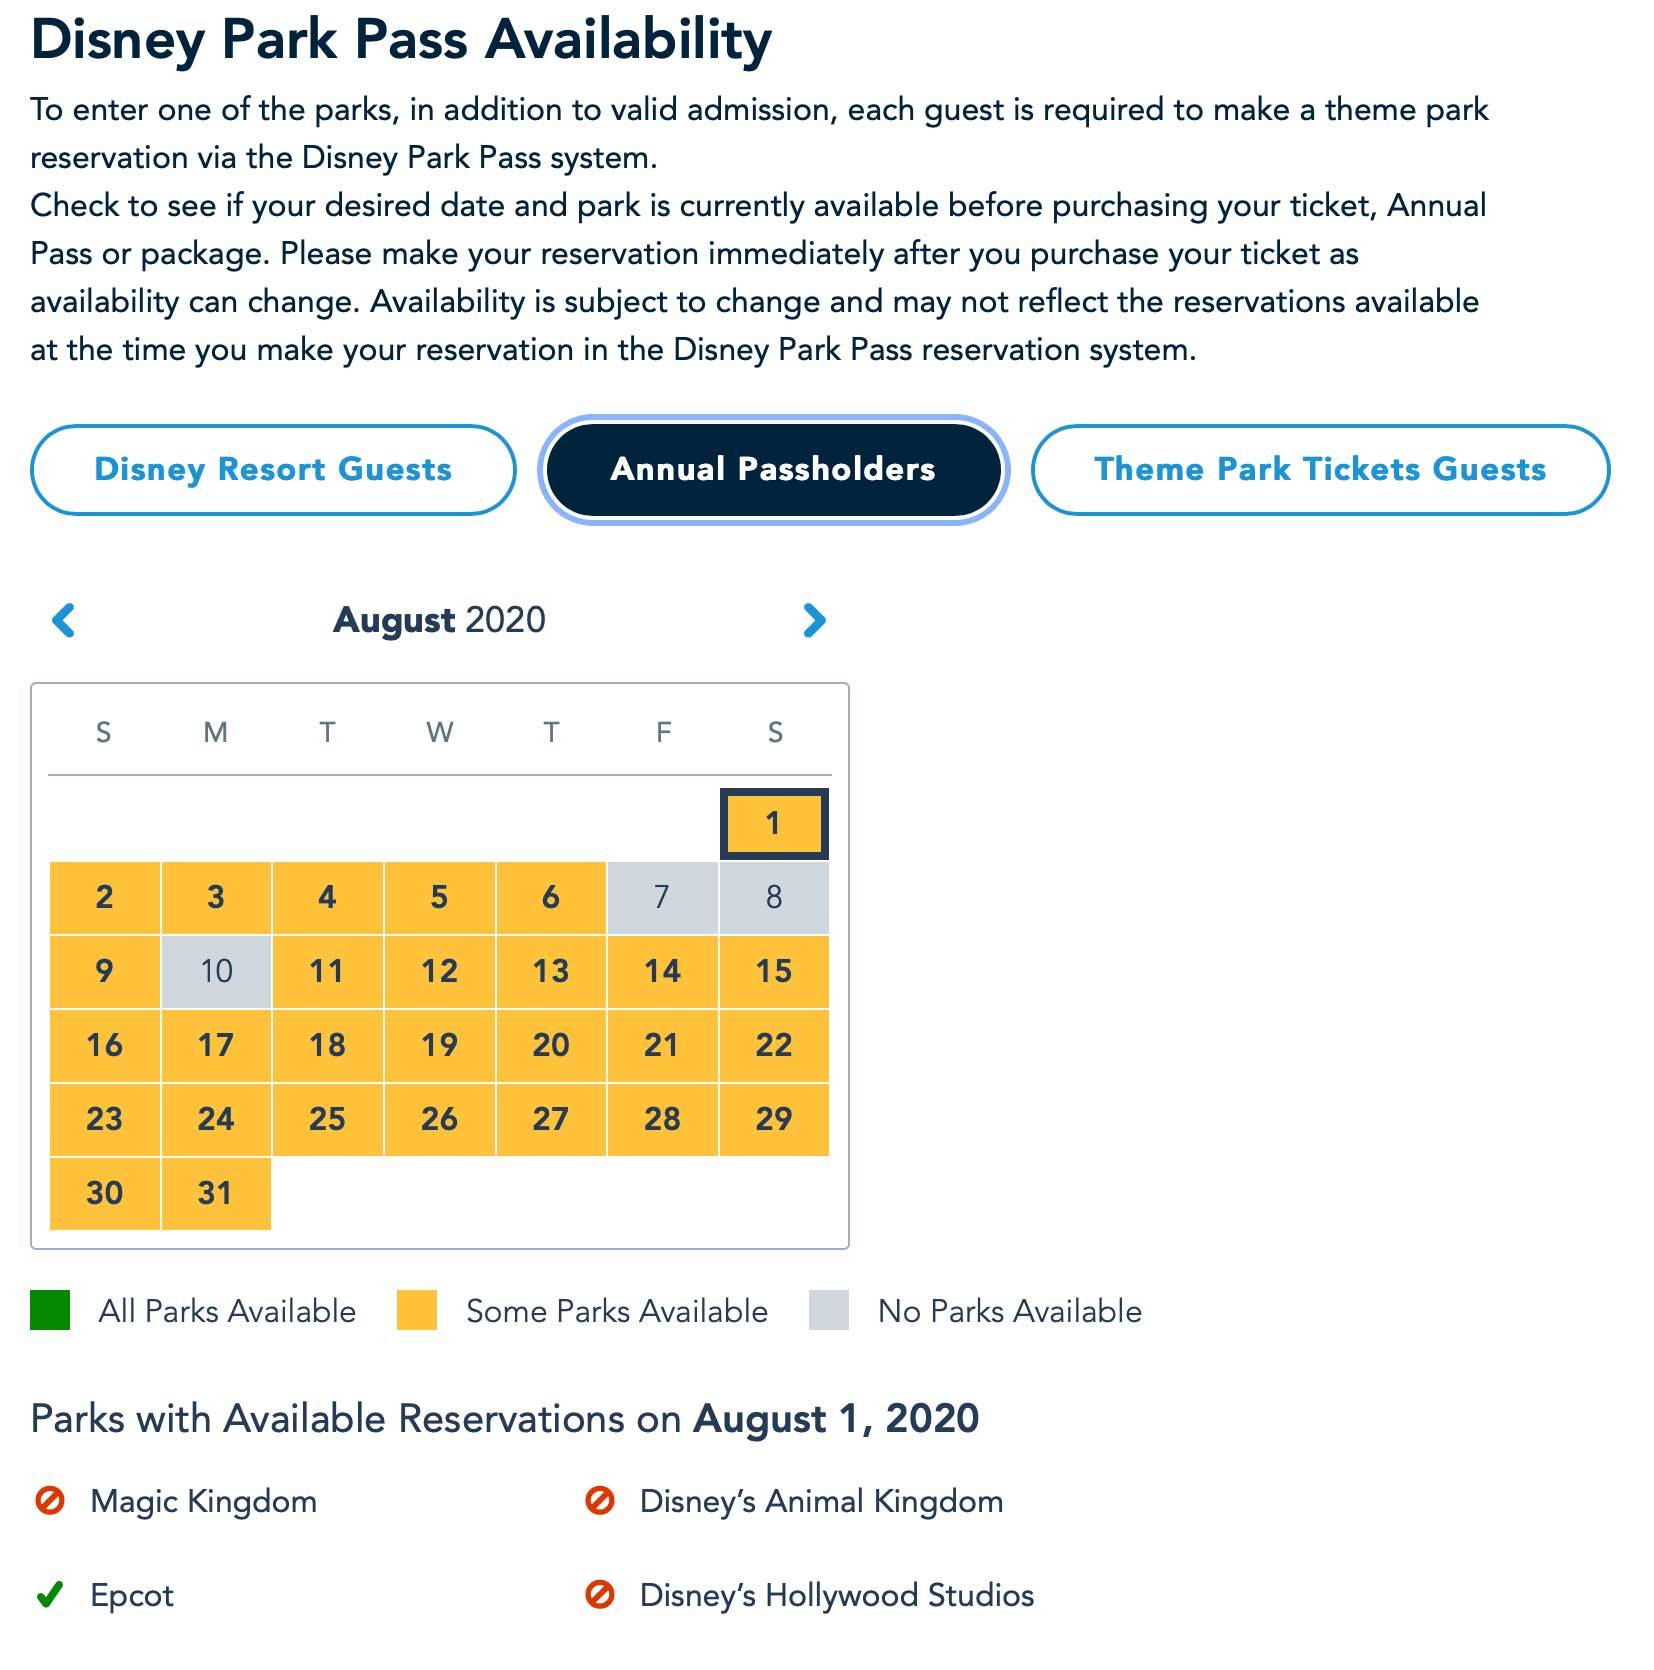 Disney Parks Pass availability continues to be in very short supply for Walt Disney World Annual Passholders